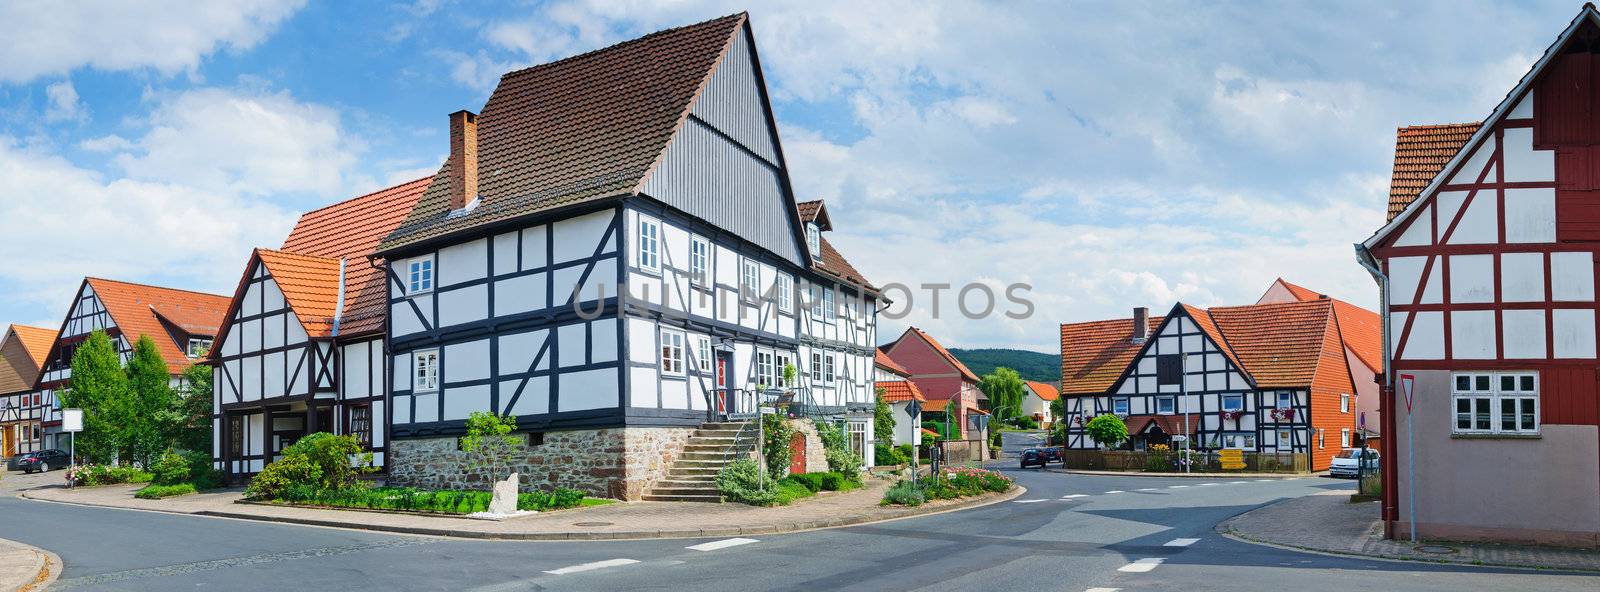 Romantic half-timbered old houses. A typical German village. Panorama